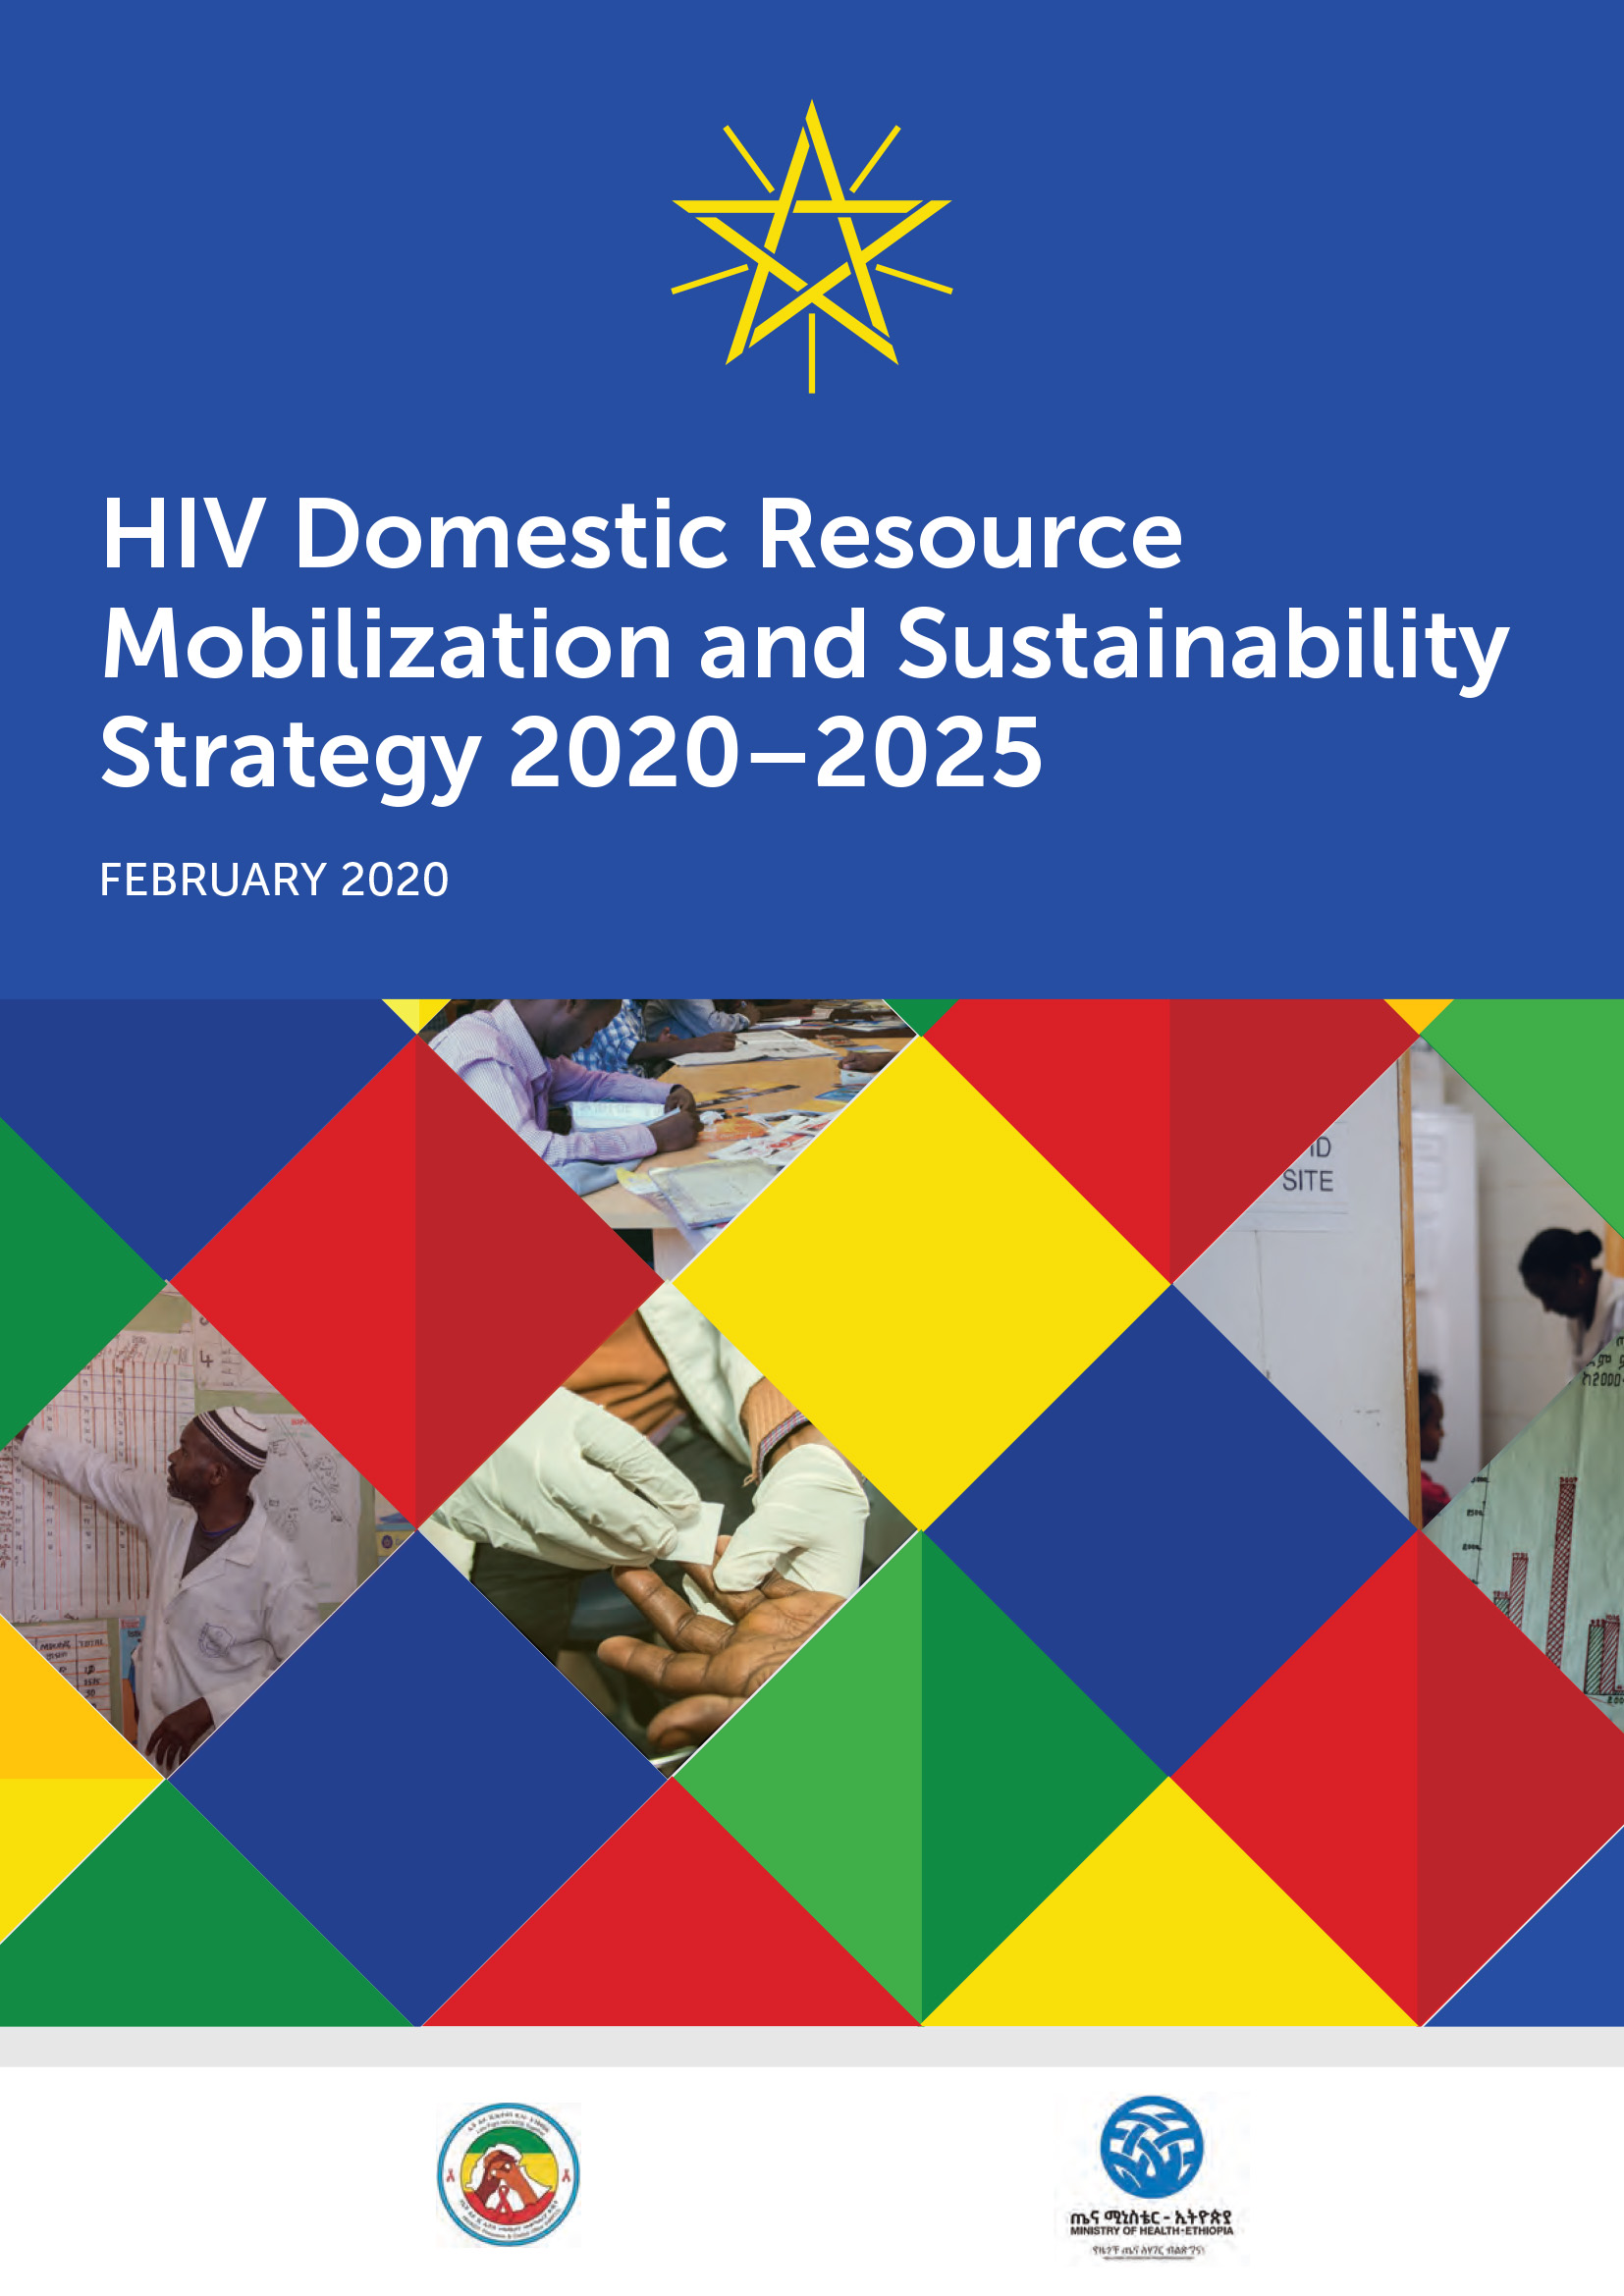 HIV domestic resource mobilization and sustainability strategy 2020–2025 